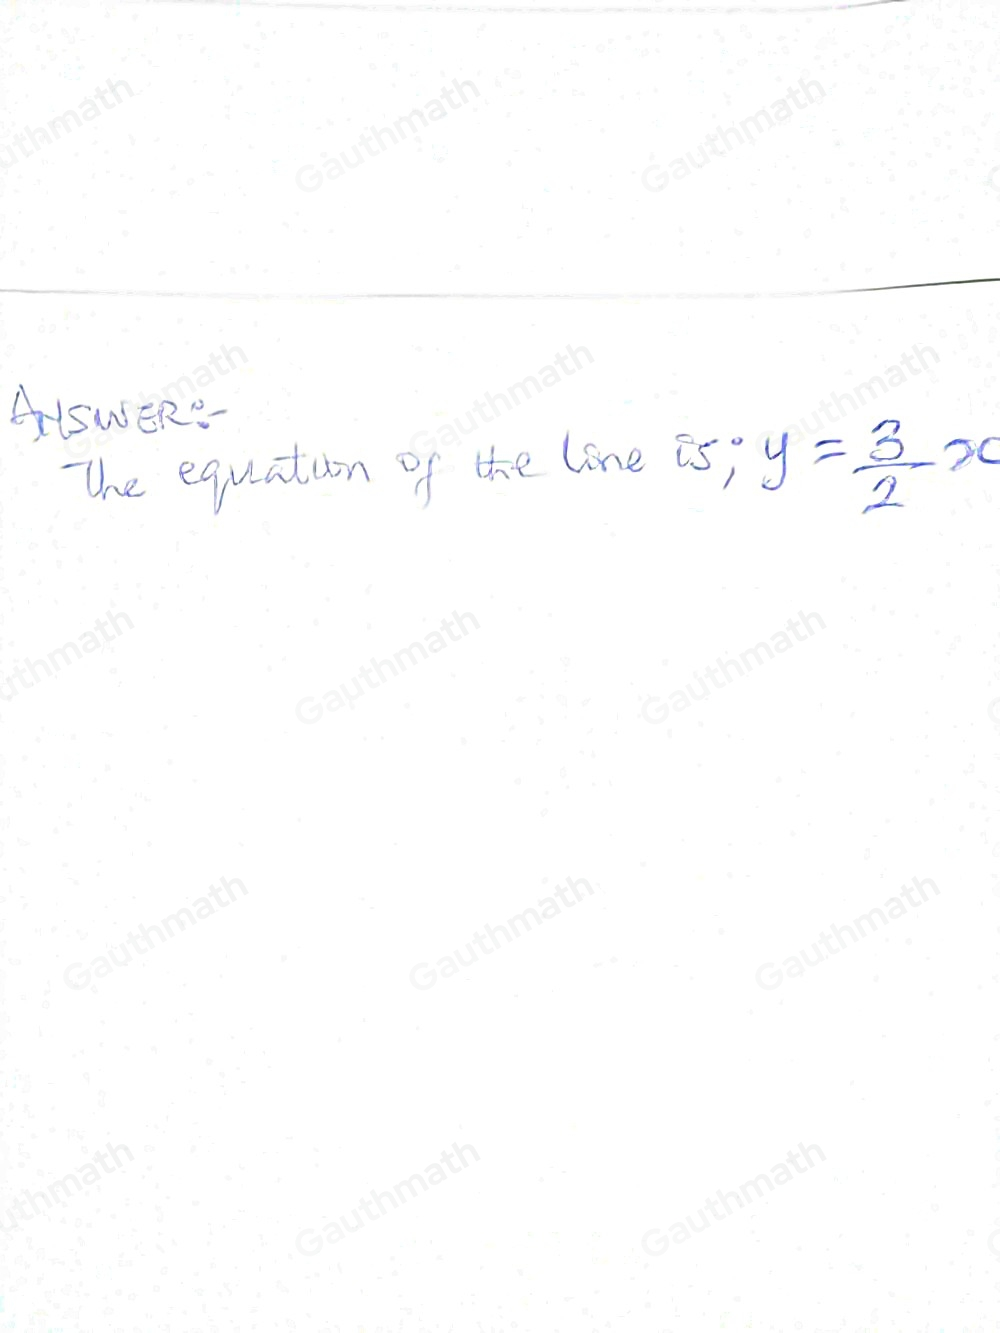 Apex Learning - C... course.apexlearning.com Geometry Sem 2 1.3.3 Quiz: Pattems and Lines Question 2 of 10 What is the equation of the following line? Be sure to scroll down first to see all answer options. A. y= 2/3 x B. y=2x C. y= 3/2 x D. y=- 2/3 x E. y=- 3/2 x F. y=3x SBddl